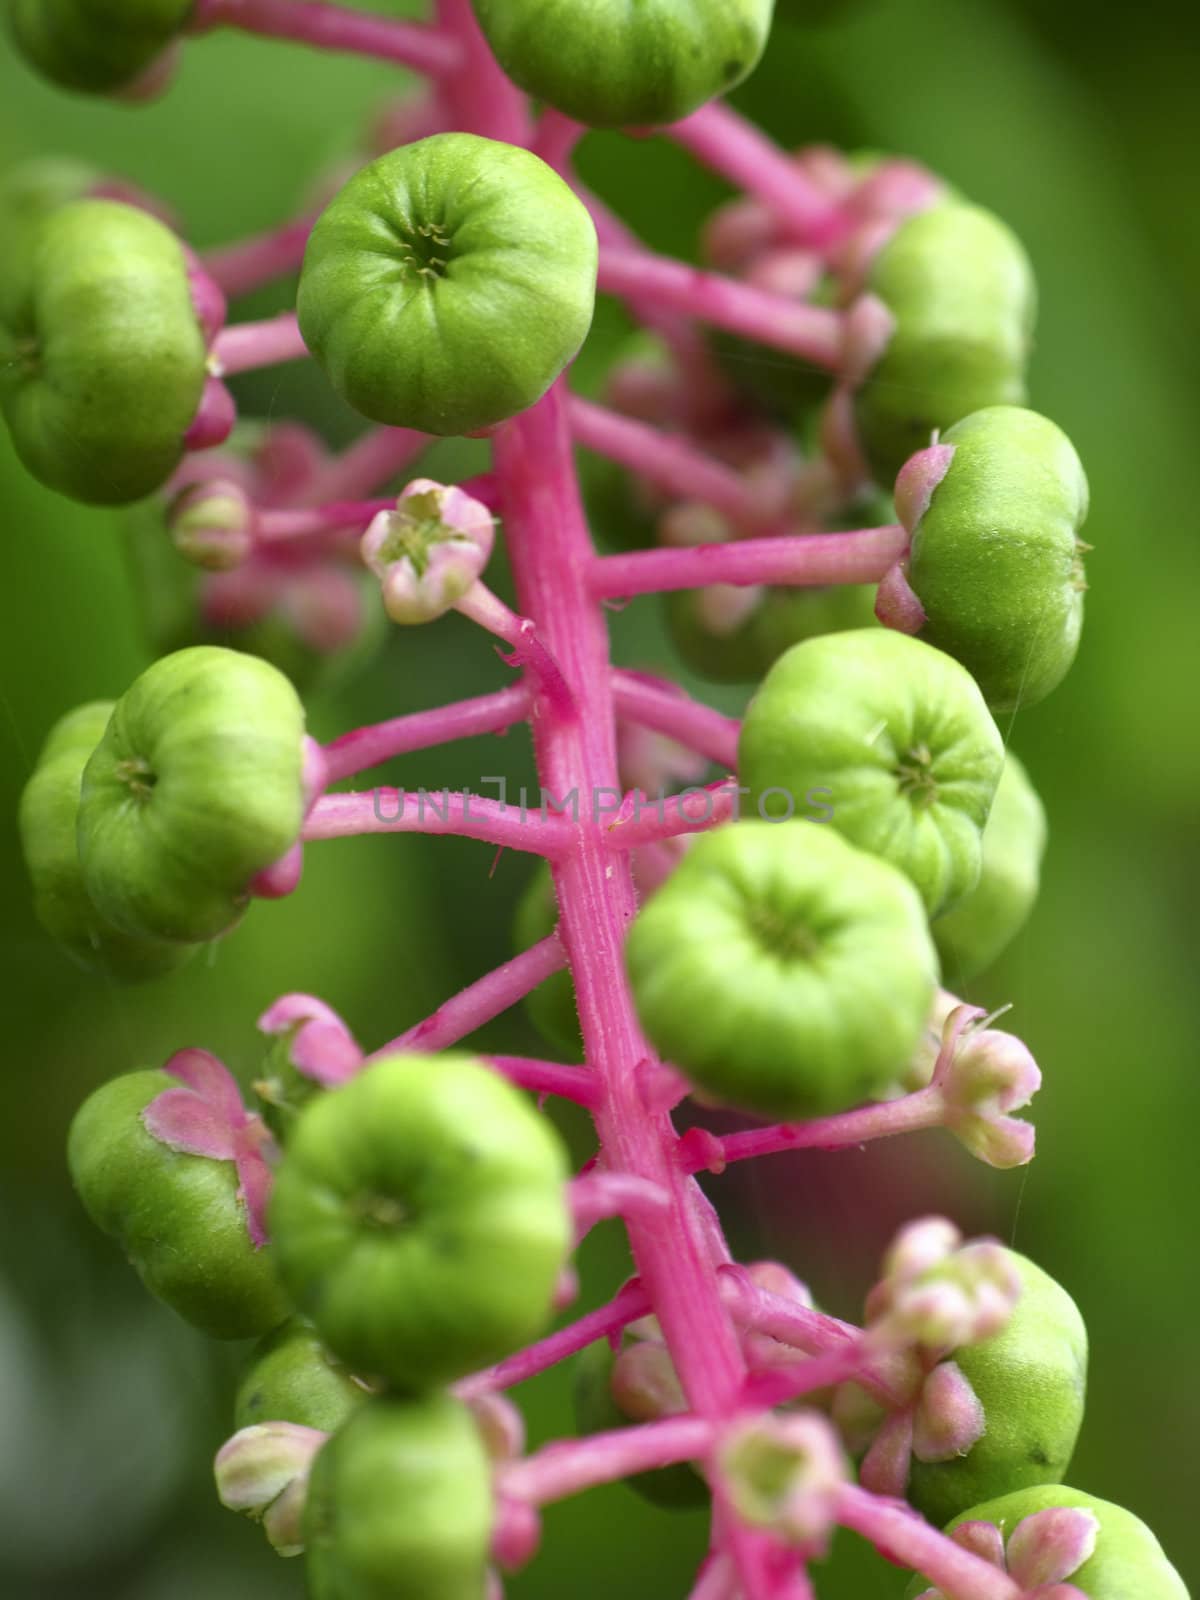 Closeup of green seeds and pink stalks of a plant